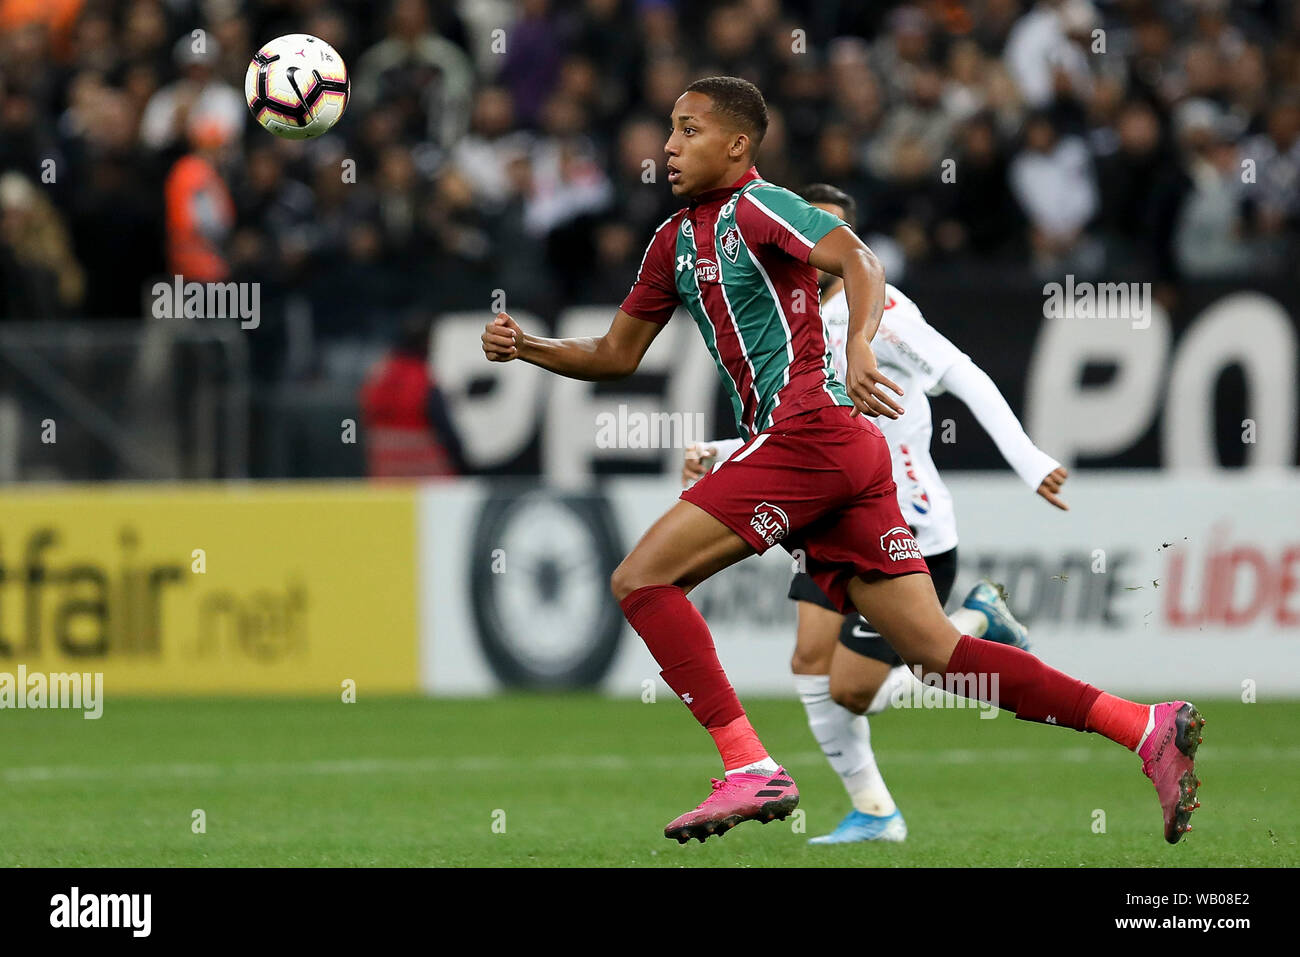 SÃO PAULO, SP - 22.08.2019: CORINTHIANS X FLUMINENSE - João Pedro during a match between Corinthians x Fluminense held at Corinthians Arena, East Zone of São Paulo, SP. The match is the first valid for the quarterfinals of the 2019 South American Cup. (Photo: Marco Galvão/Fotoarena) Stock Photo